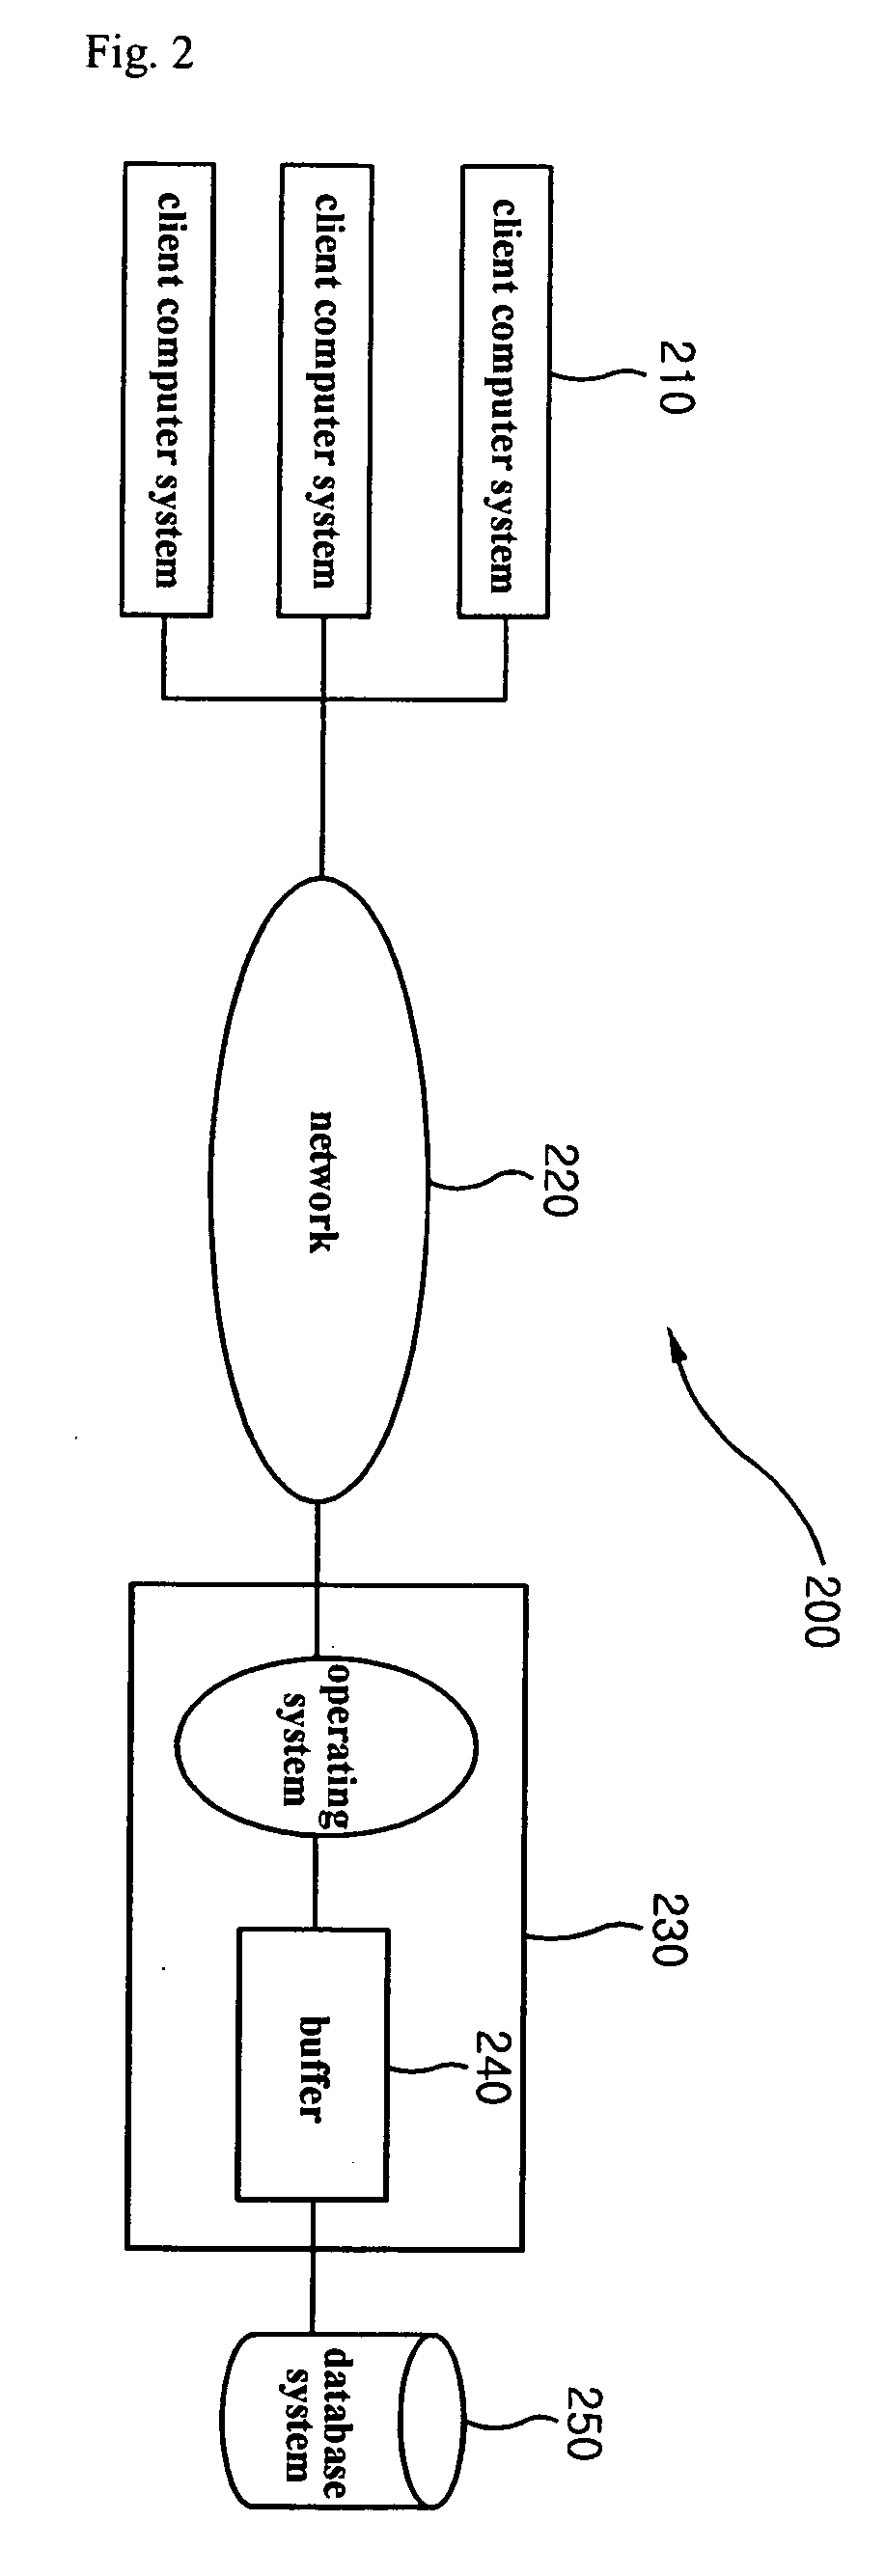 Database system and method for adapting a main database components in a main memory thereof